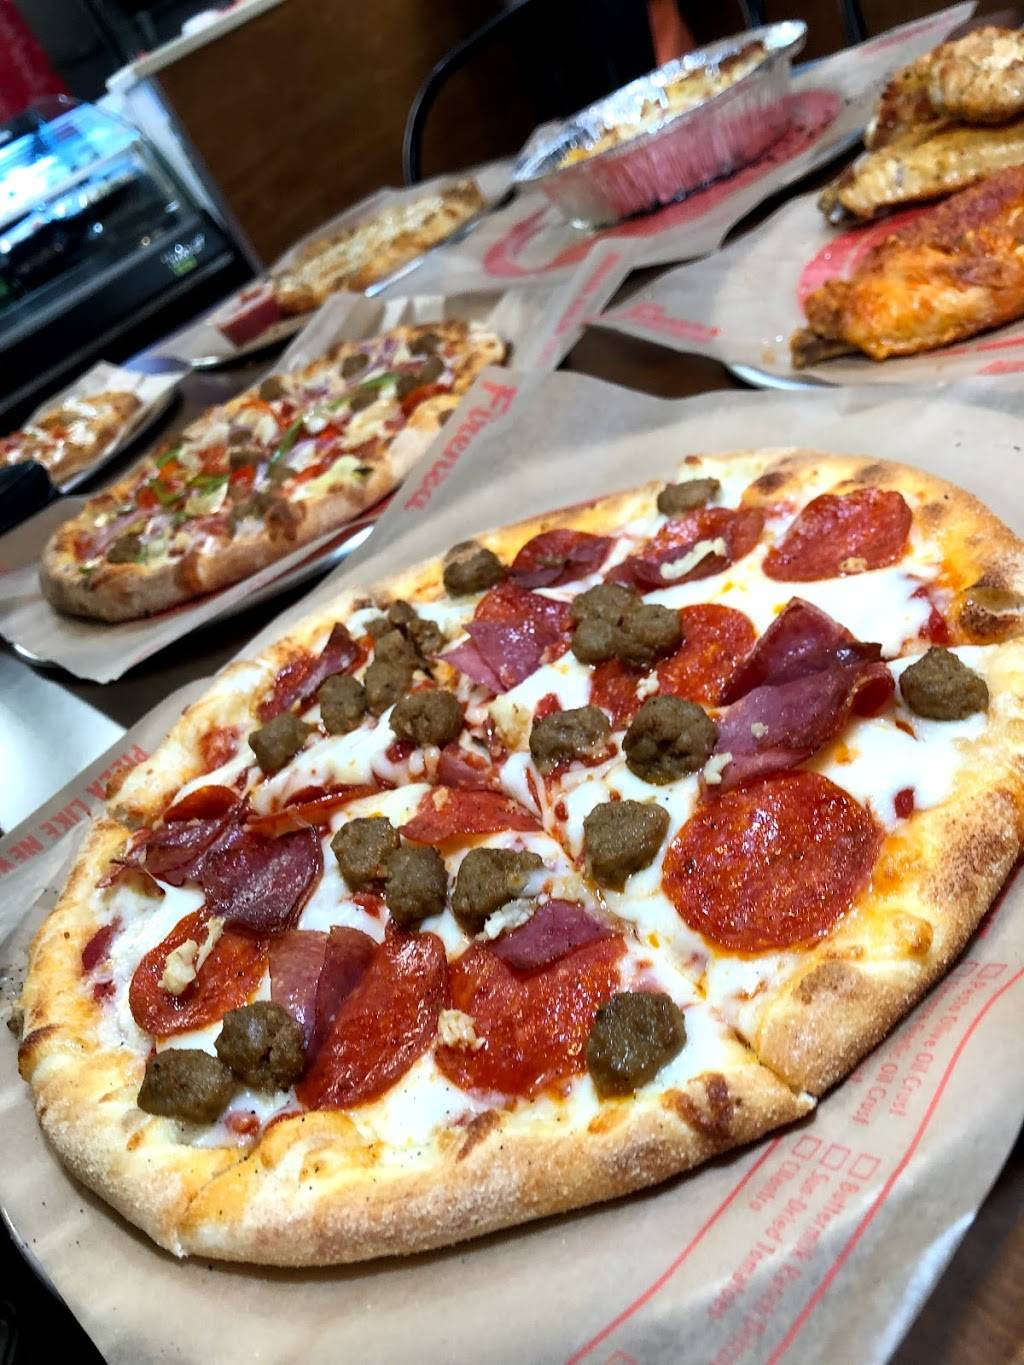 Firenza Pizza | restaurant | The Plaza at Harmon Meadow, 700 Plaza Dr, Secaucus, NJ 07094, United States | 2012102562 OR +1 201-210-2562